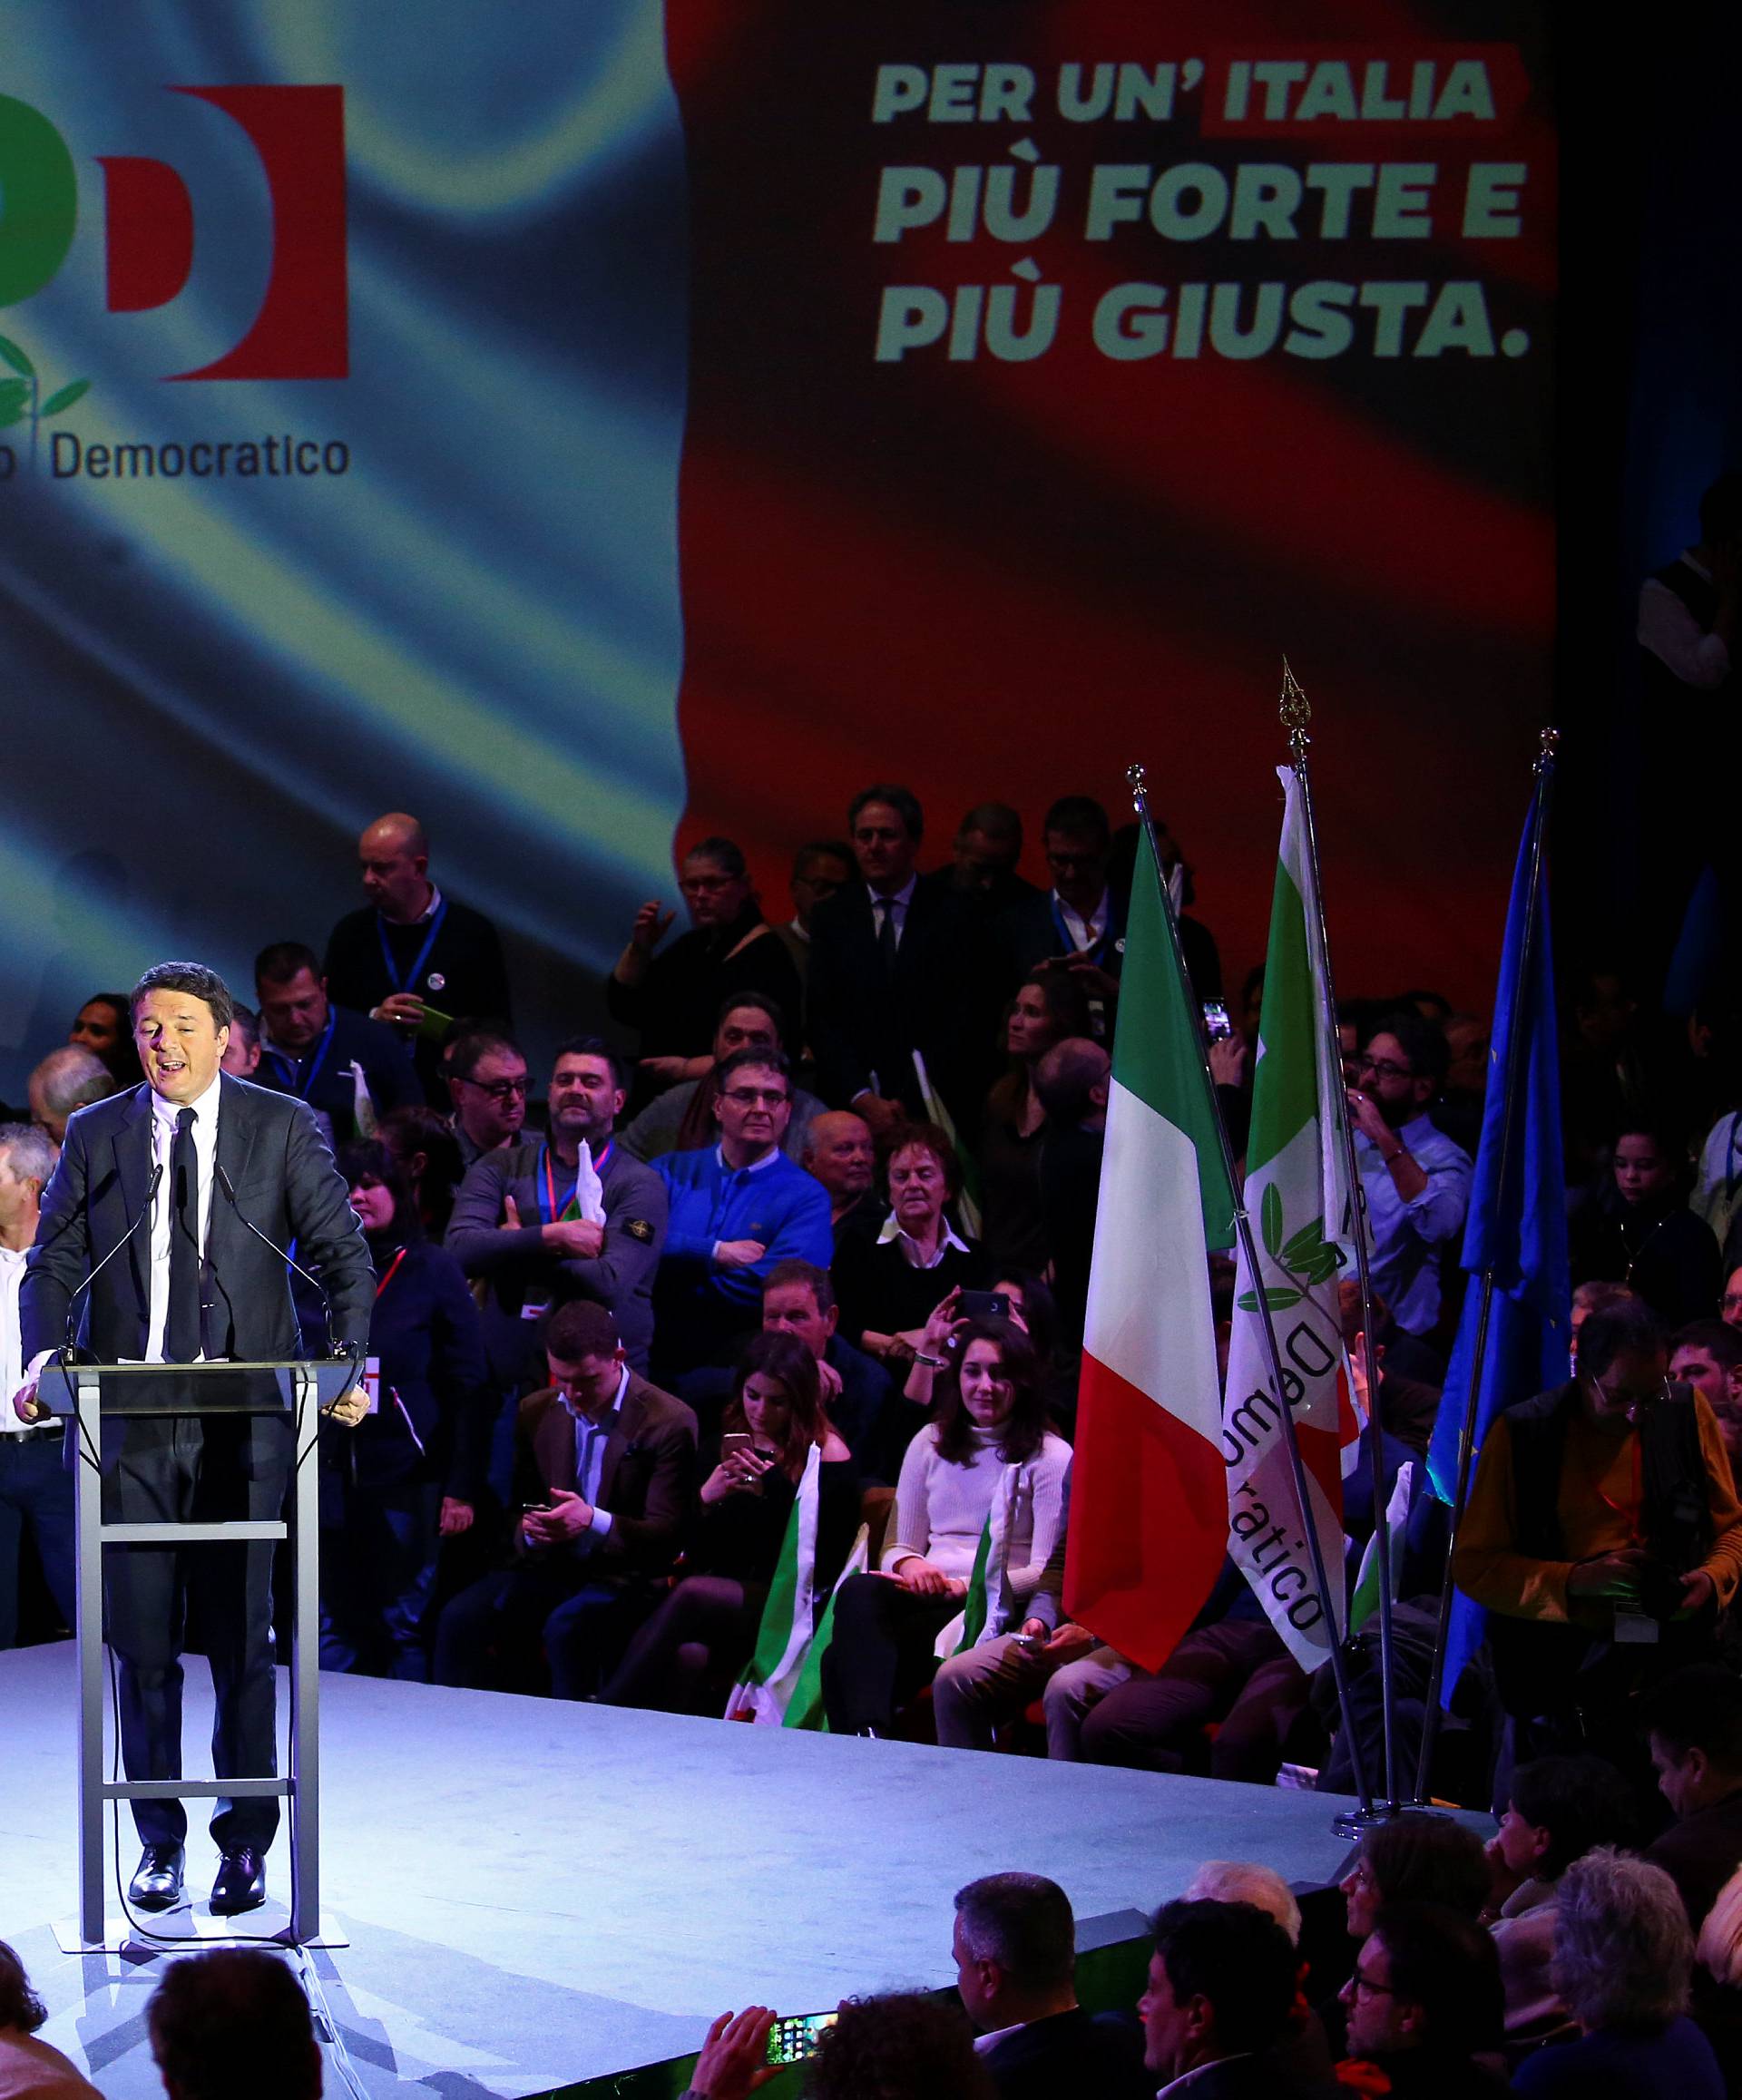 Democratic Party (PD) leader Renzi speaks during the final rally ahead of the March 4 elections in Florence